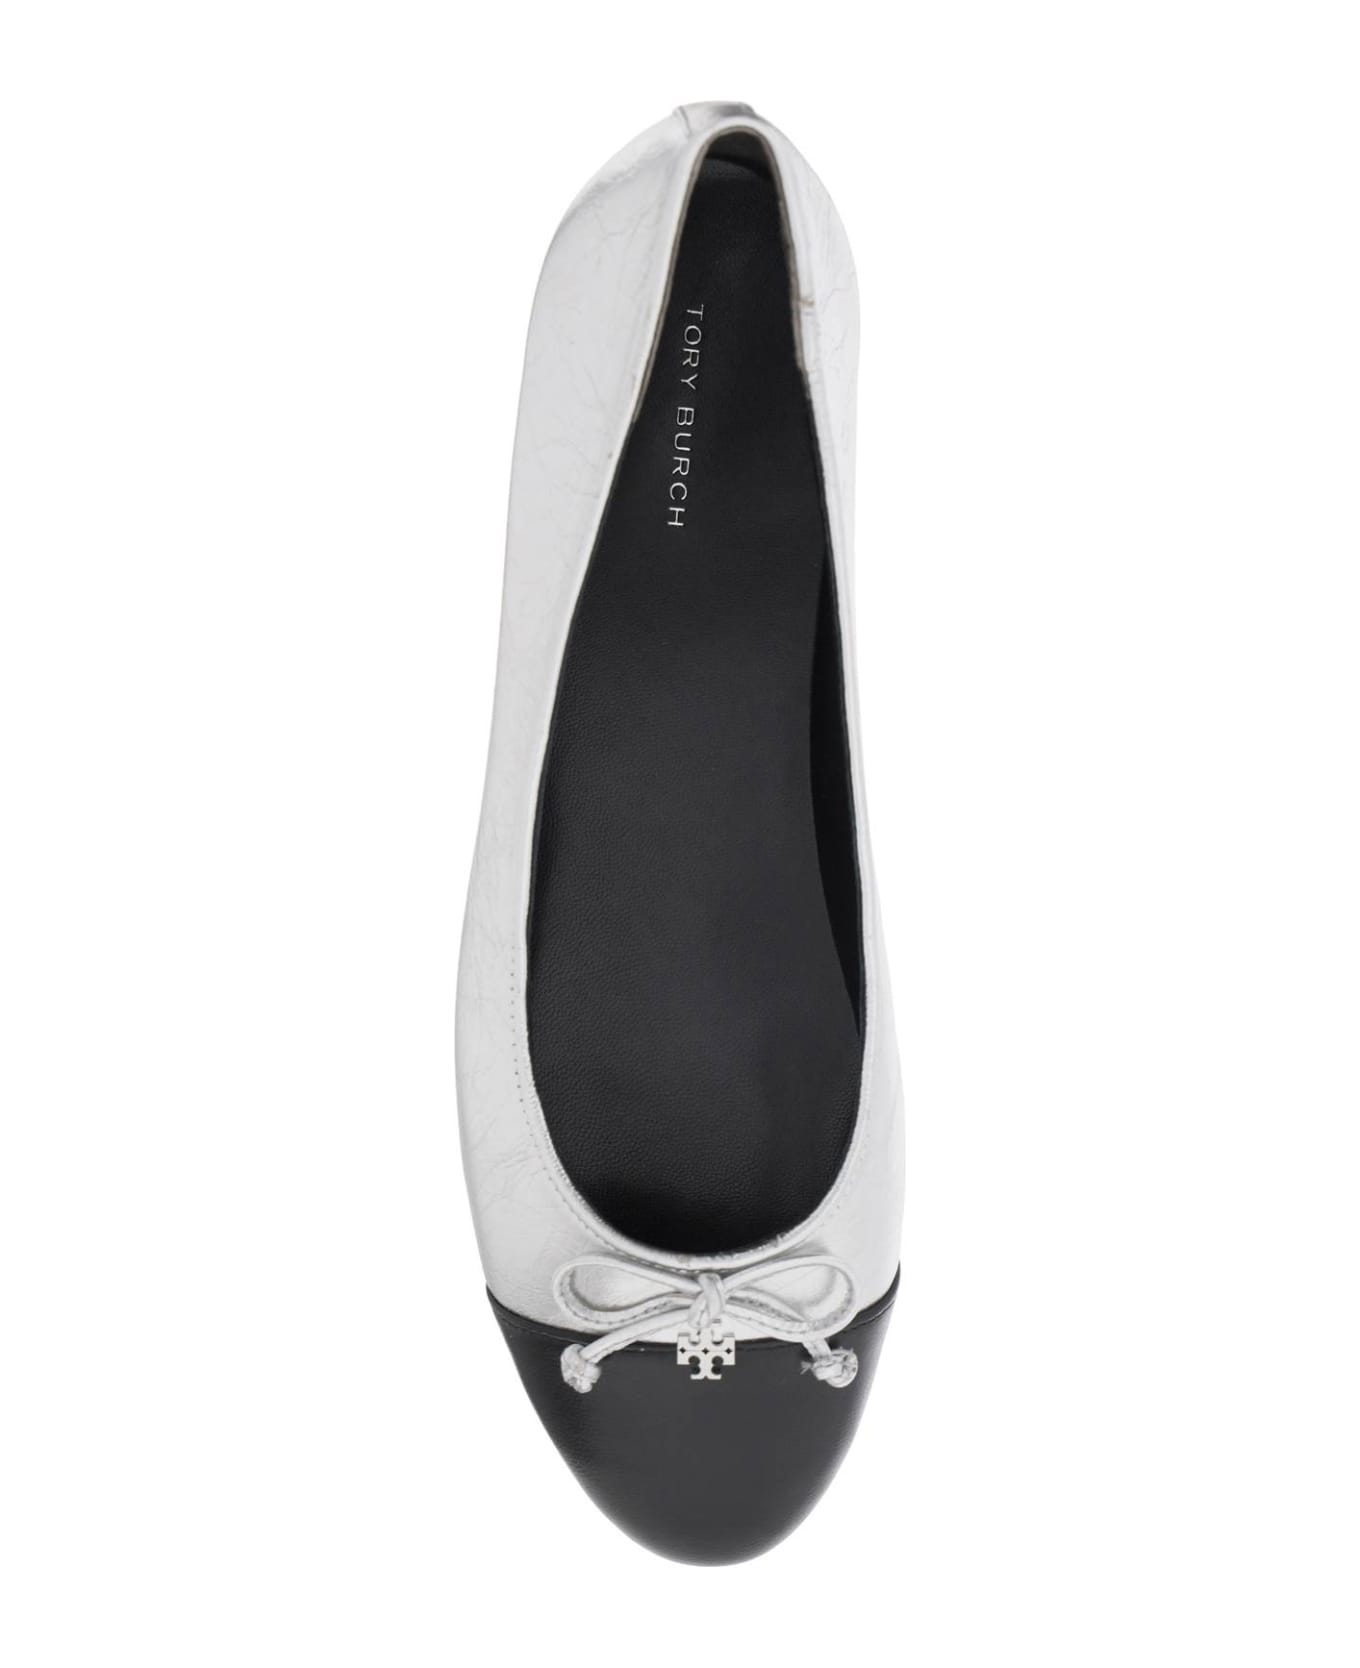 Tory Burch Laminated Ballet Flats With Contrasting Toe - Silver/Black フラットシューズ